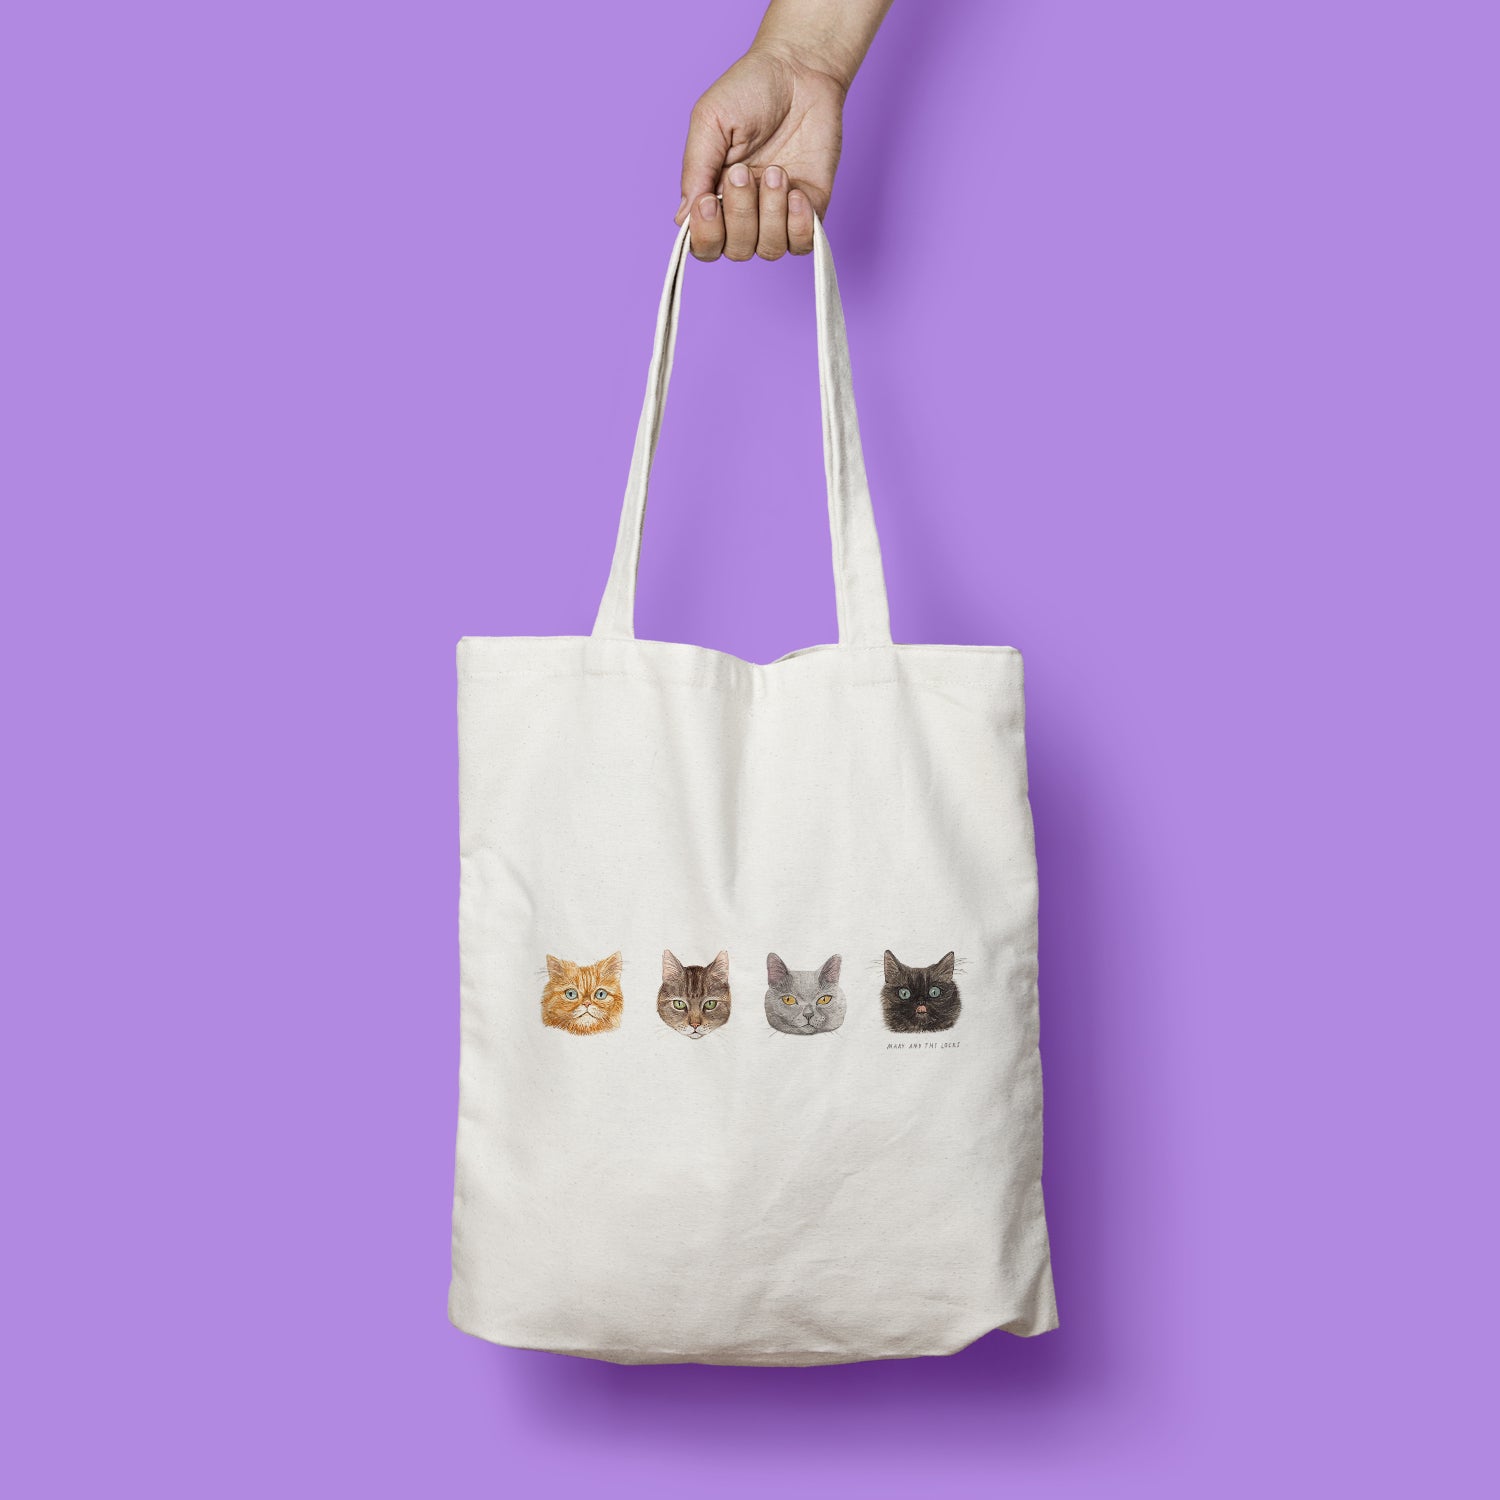 Tote Bag - Mary and The Locks